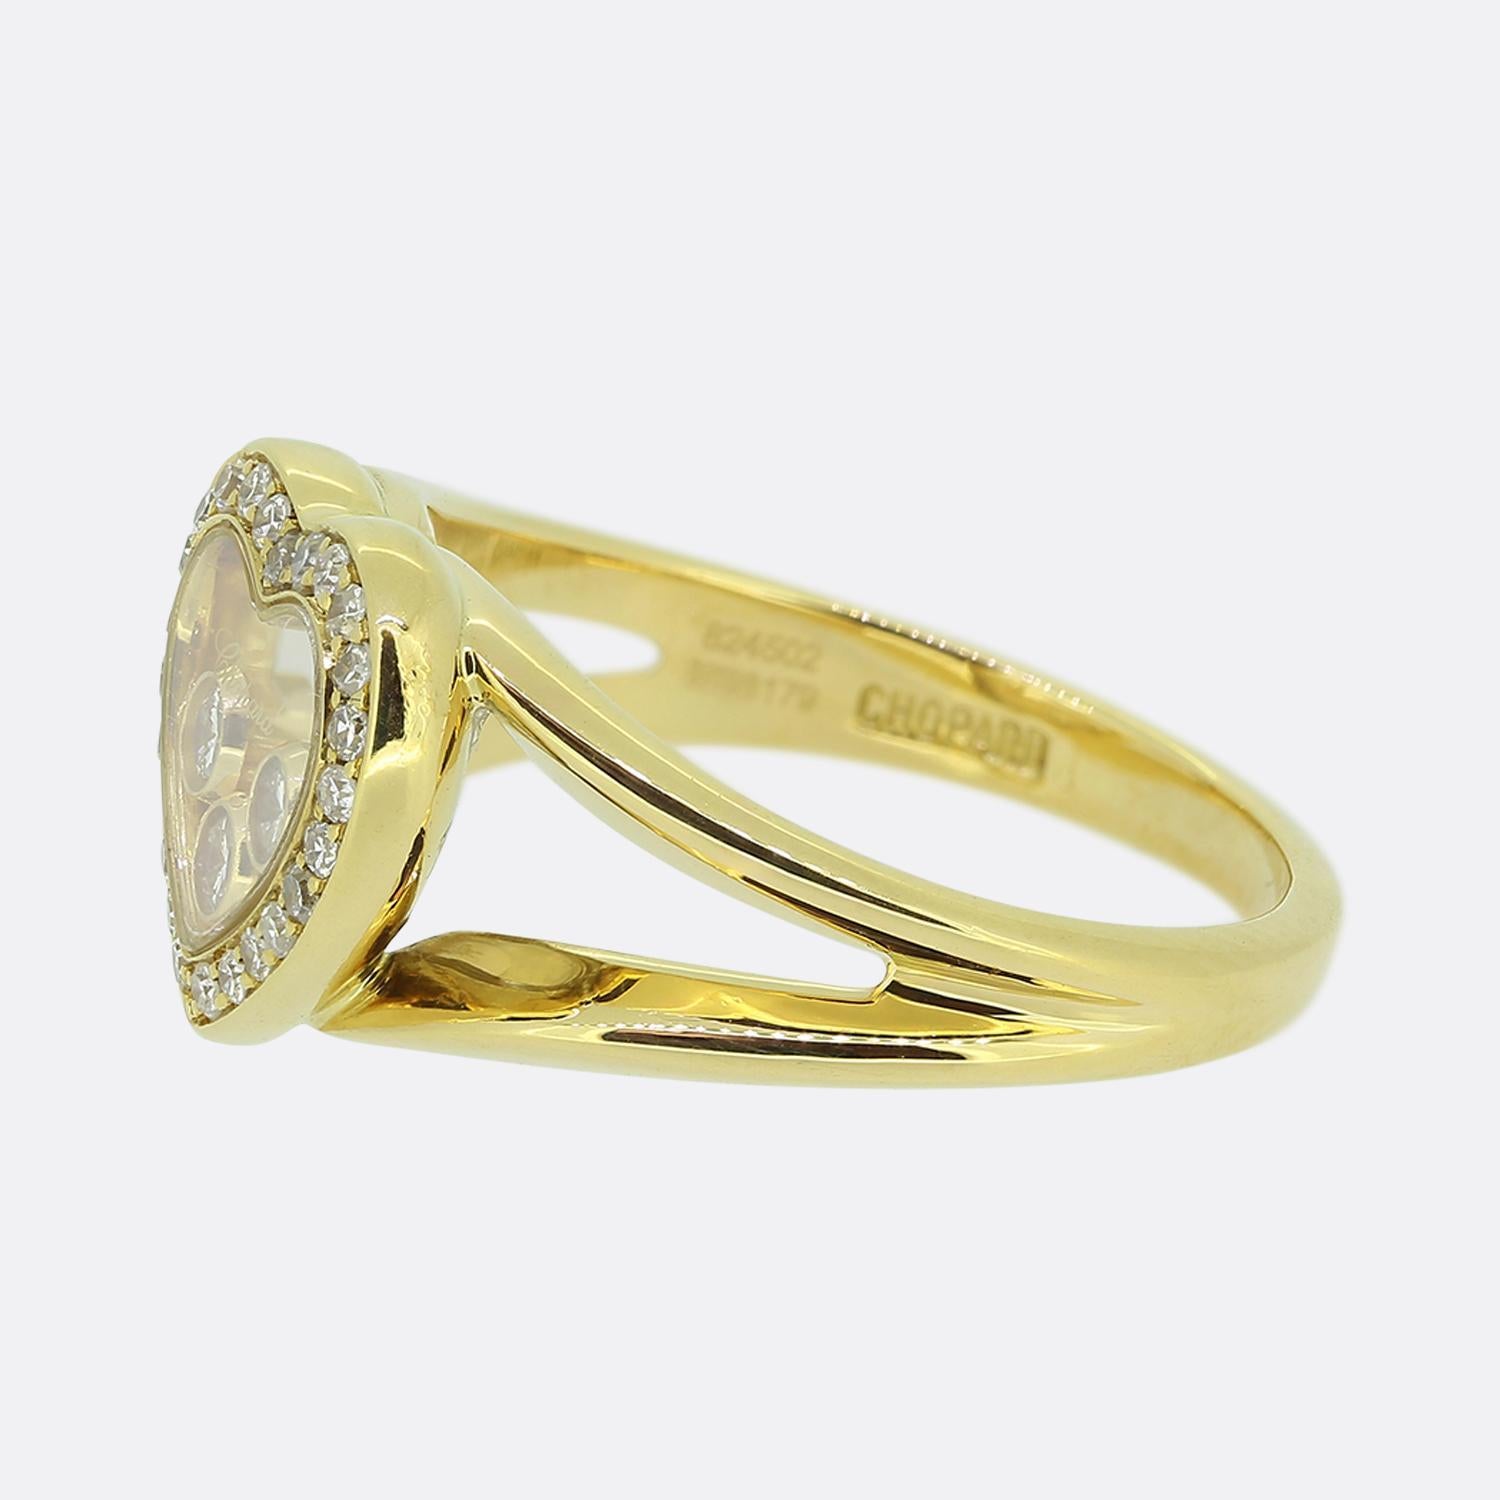 Here we have a romantic diamond ring from the world renowned French jewellery designer Chopard. This piece has been crafted from 18ct yellow gold and forms part of their iconic Happy Diamonds collection. The face takes on a love heart design with